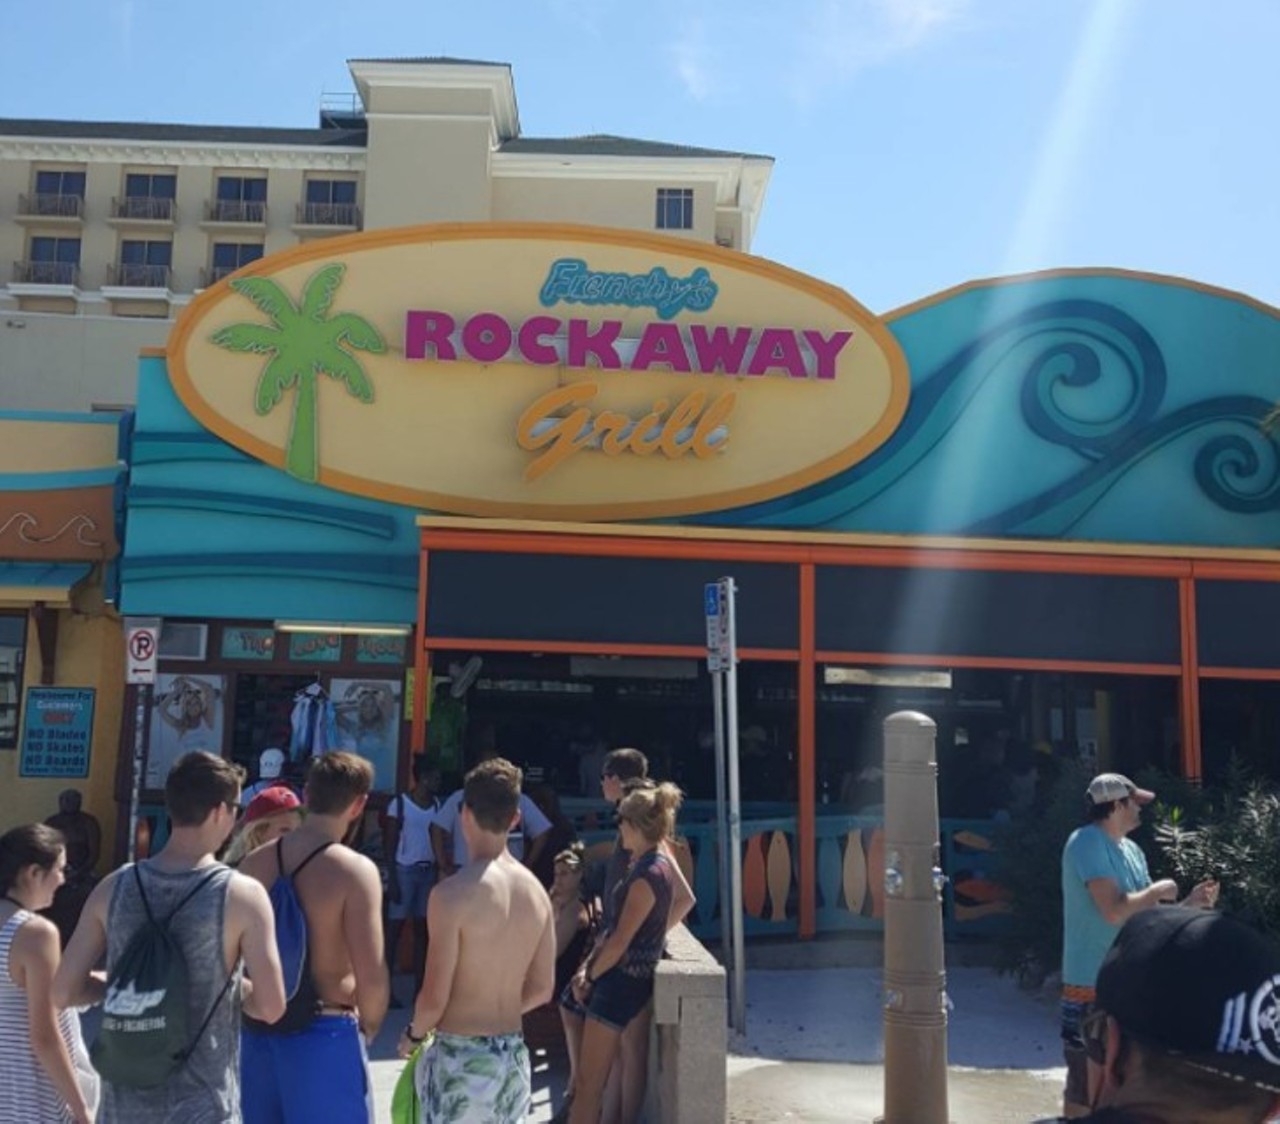 Frenchy&#146;s Rockaway Grill
7 Rockaway Street, Clearwater, 33767 
It might be tempting to go to any of the other Frenchy&#146;s nearby, but this is the only one right on Clearwater Beach. Visit for the She Crab soup and happy hour, but stay for the tropical decor and unparalleled view of the sunset.
Photo via kurt_marston/Instagram